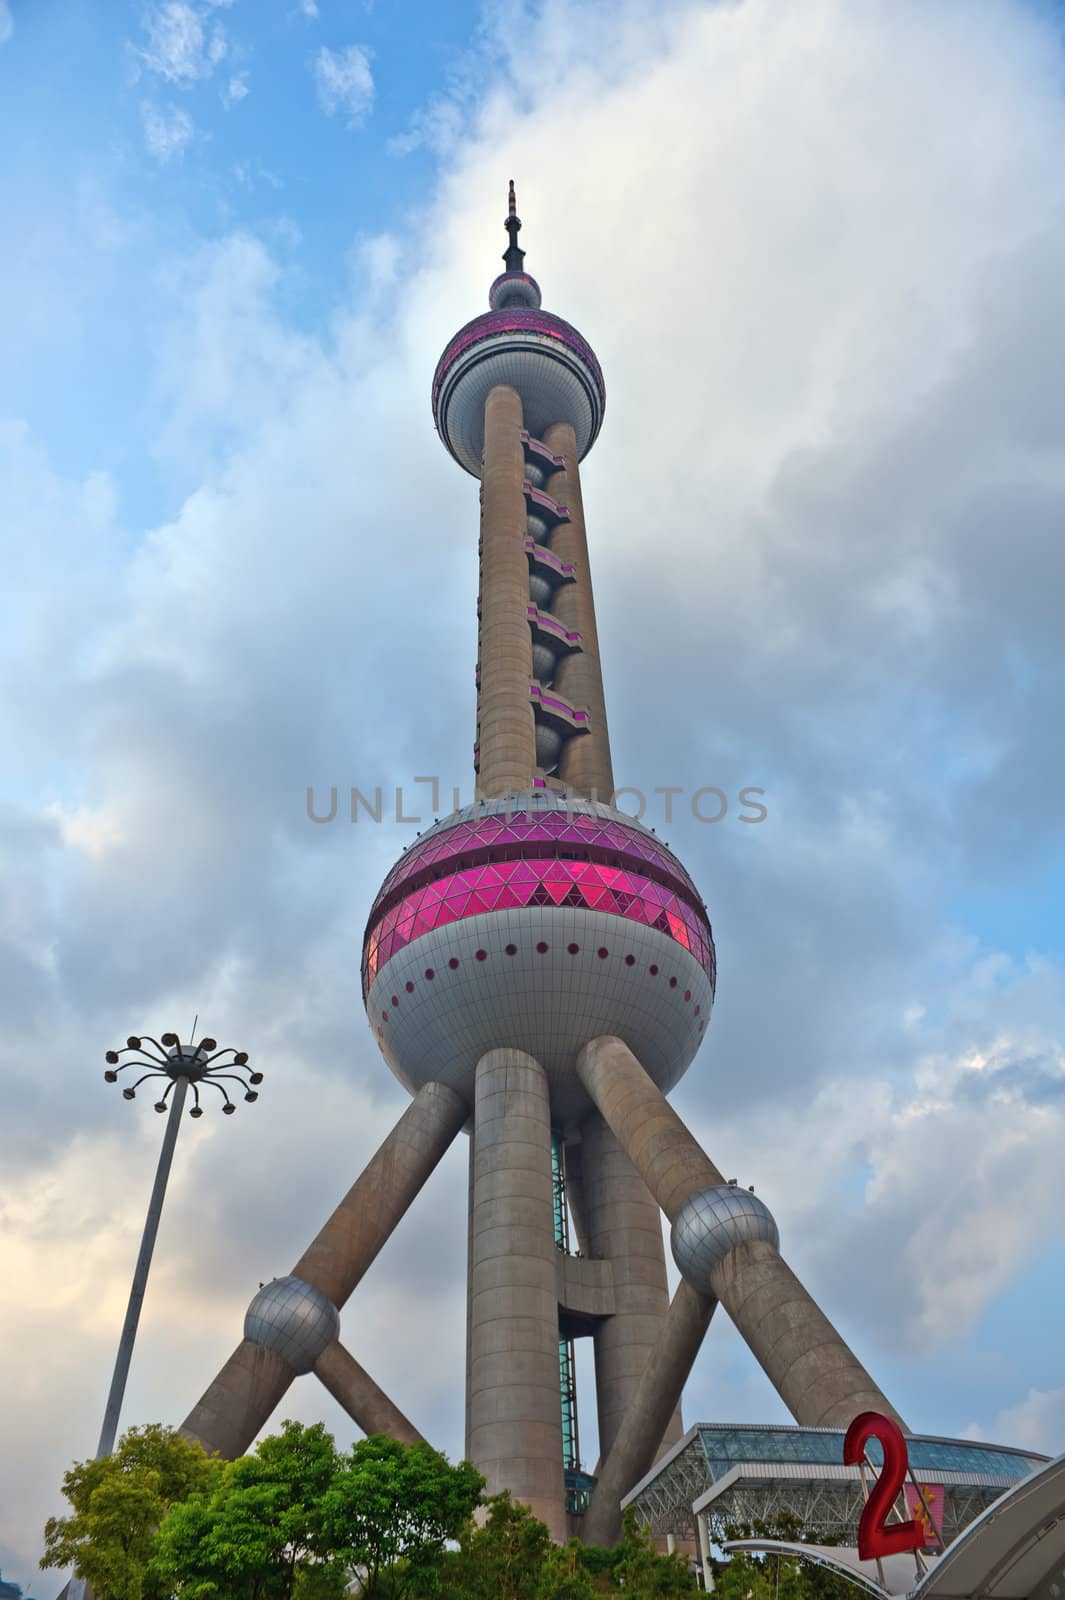 Shanghai, China - November 8, 2008: The Oriental Pearl Tower located in the Pudong district of downtown Shanghai. It was the tallest structure in China until 2007 and is an iconic part of the city skyline.
